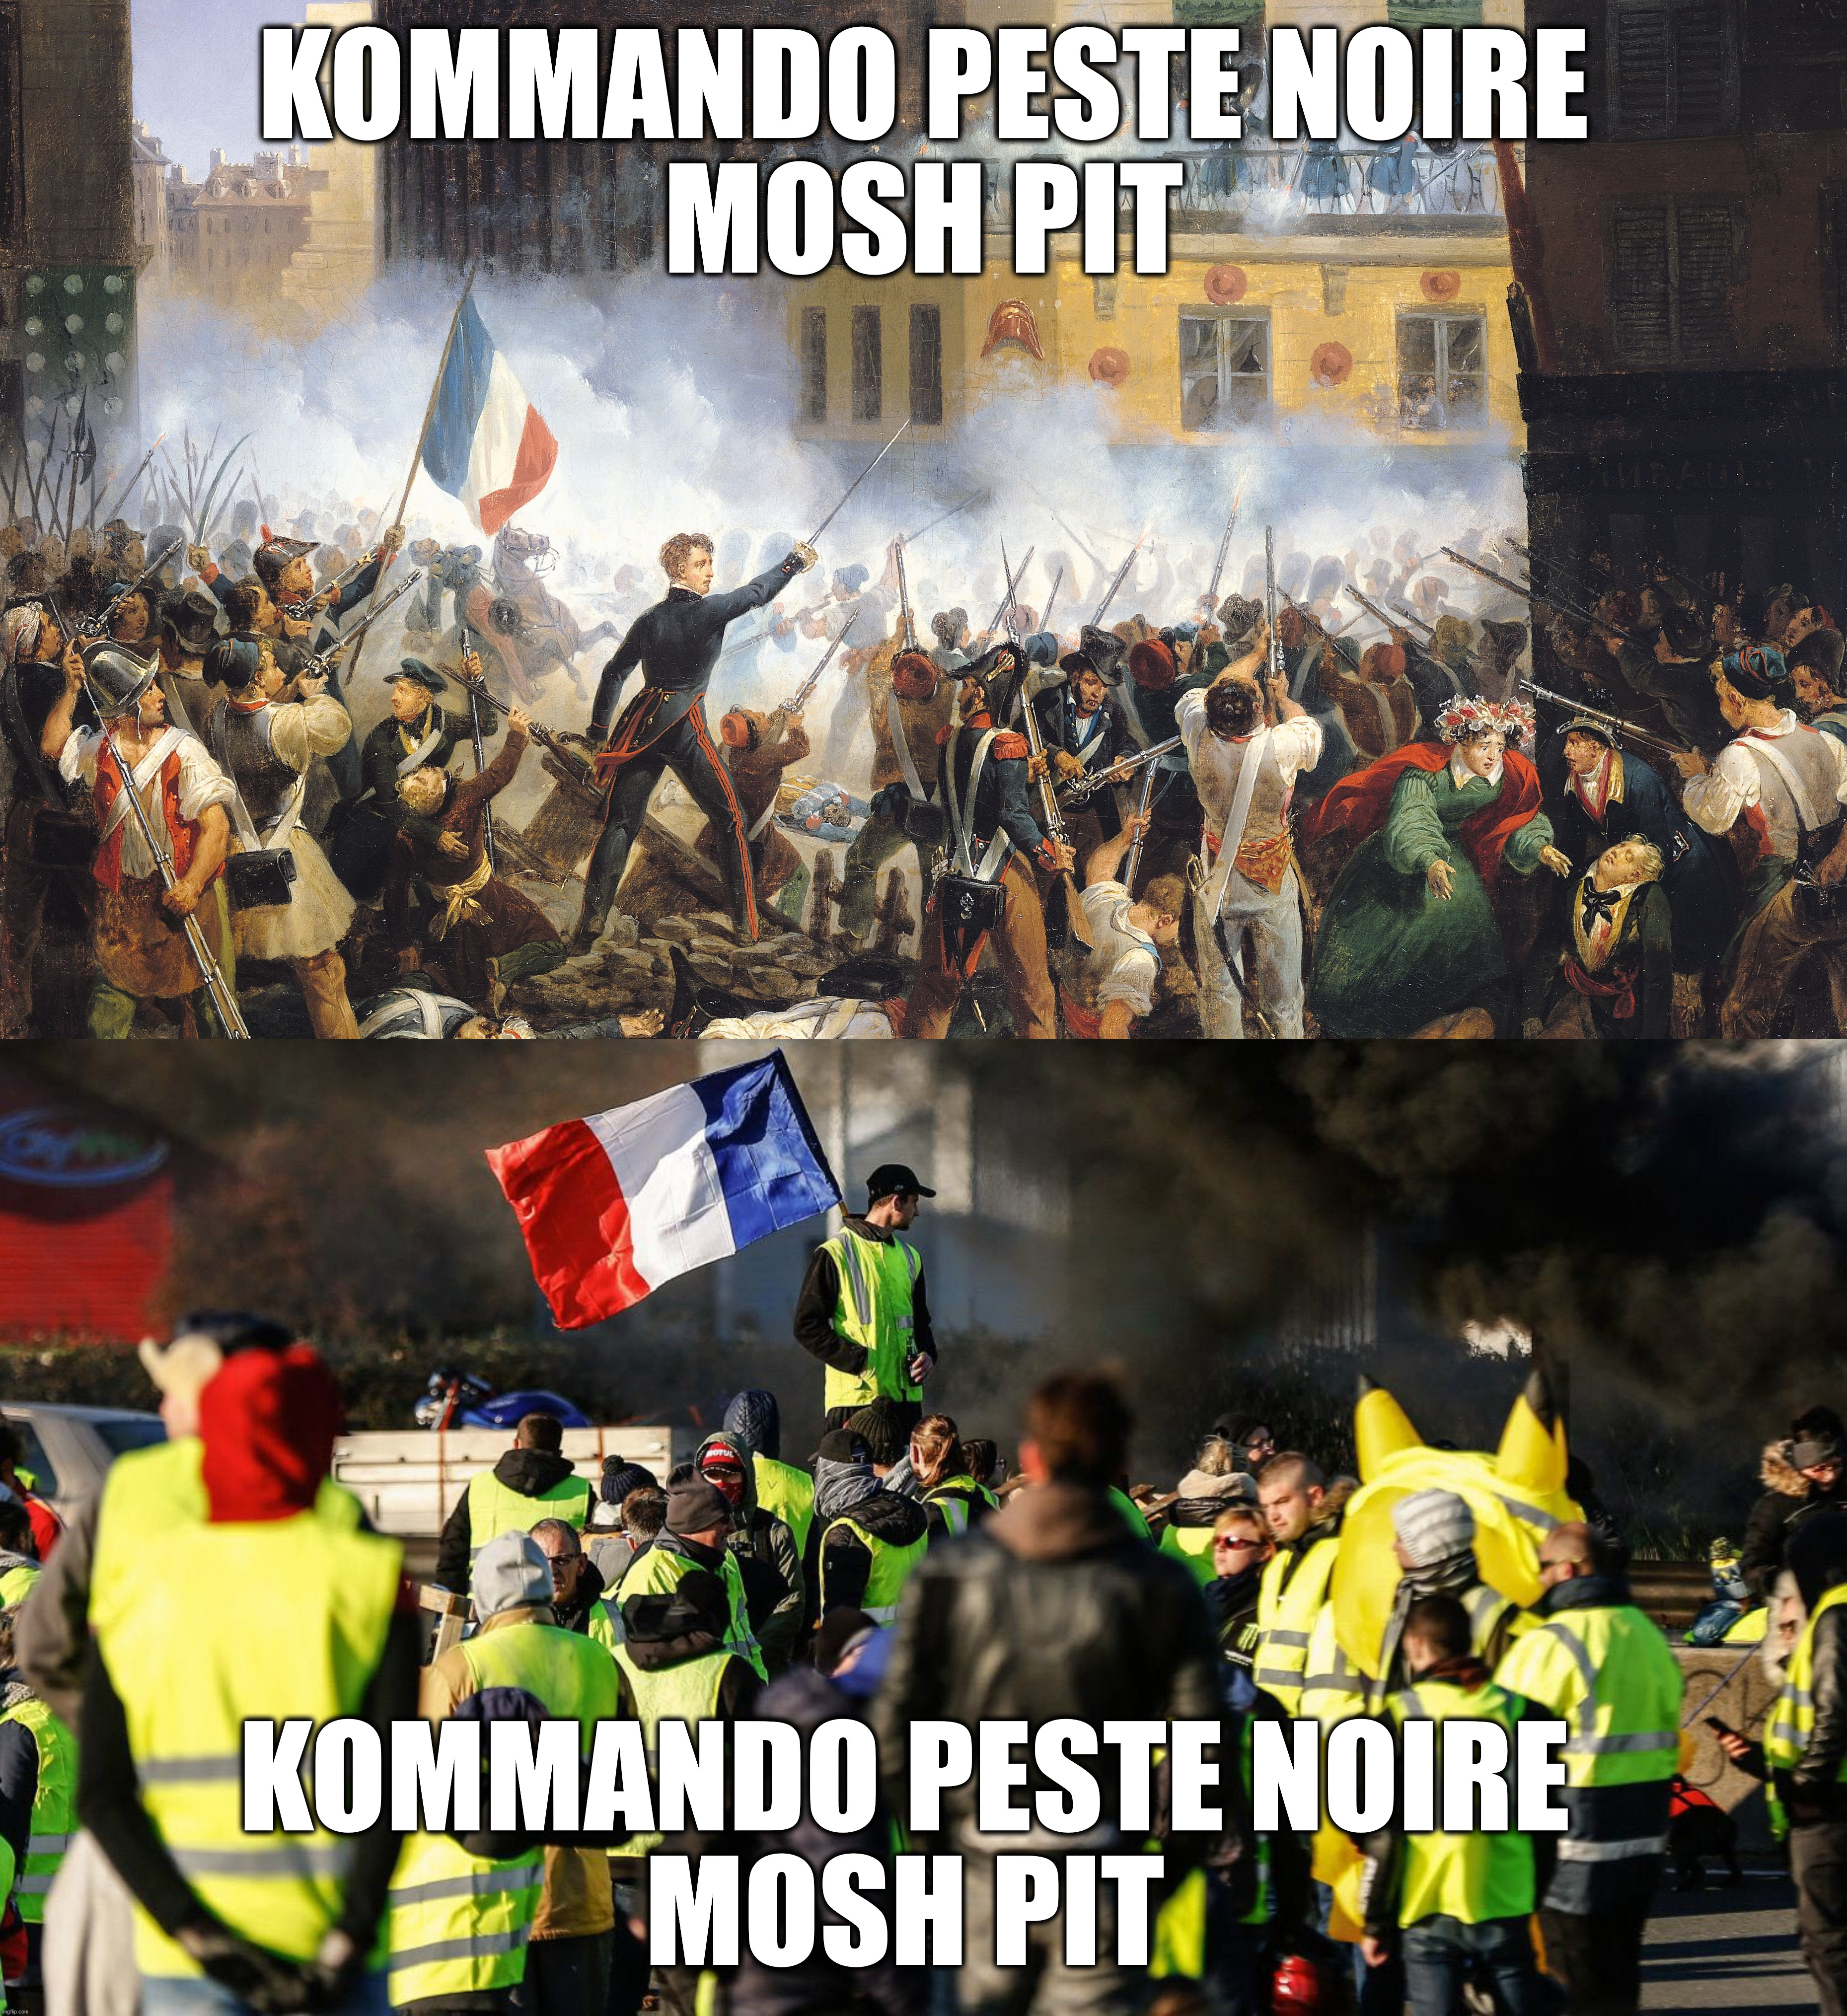 Peste Noire, one of most badass metal band from France | KOMMANDO PESTE NOIRE
MOSH PIT; KOMMANDO PESTE NOIRE
MOSH PIT | image tagged in heavy metal,metal,black metal,mosh pit,peste noire,france | made w/ Imgflip meme maker